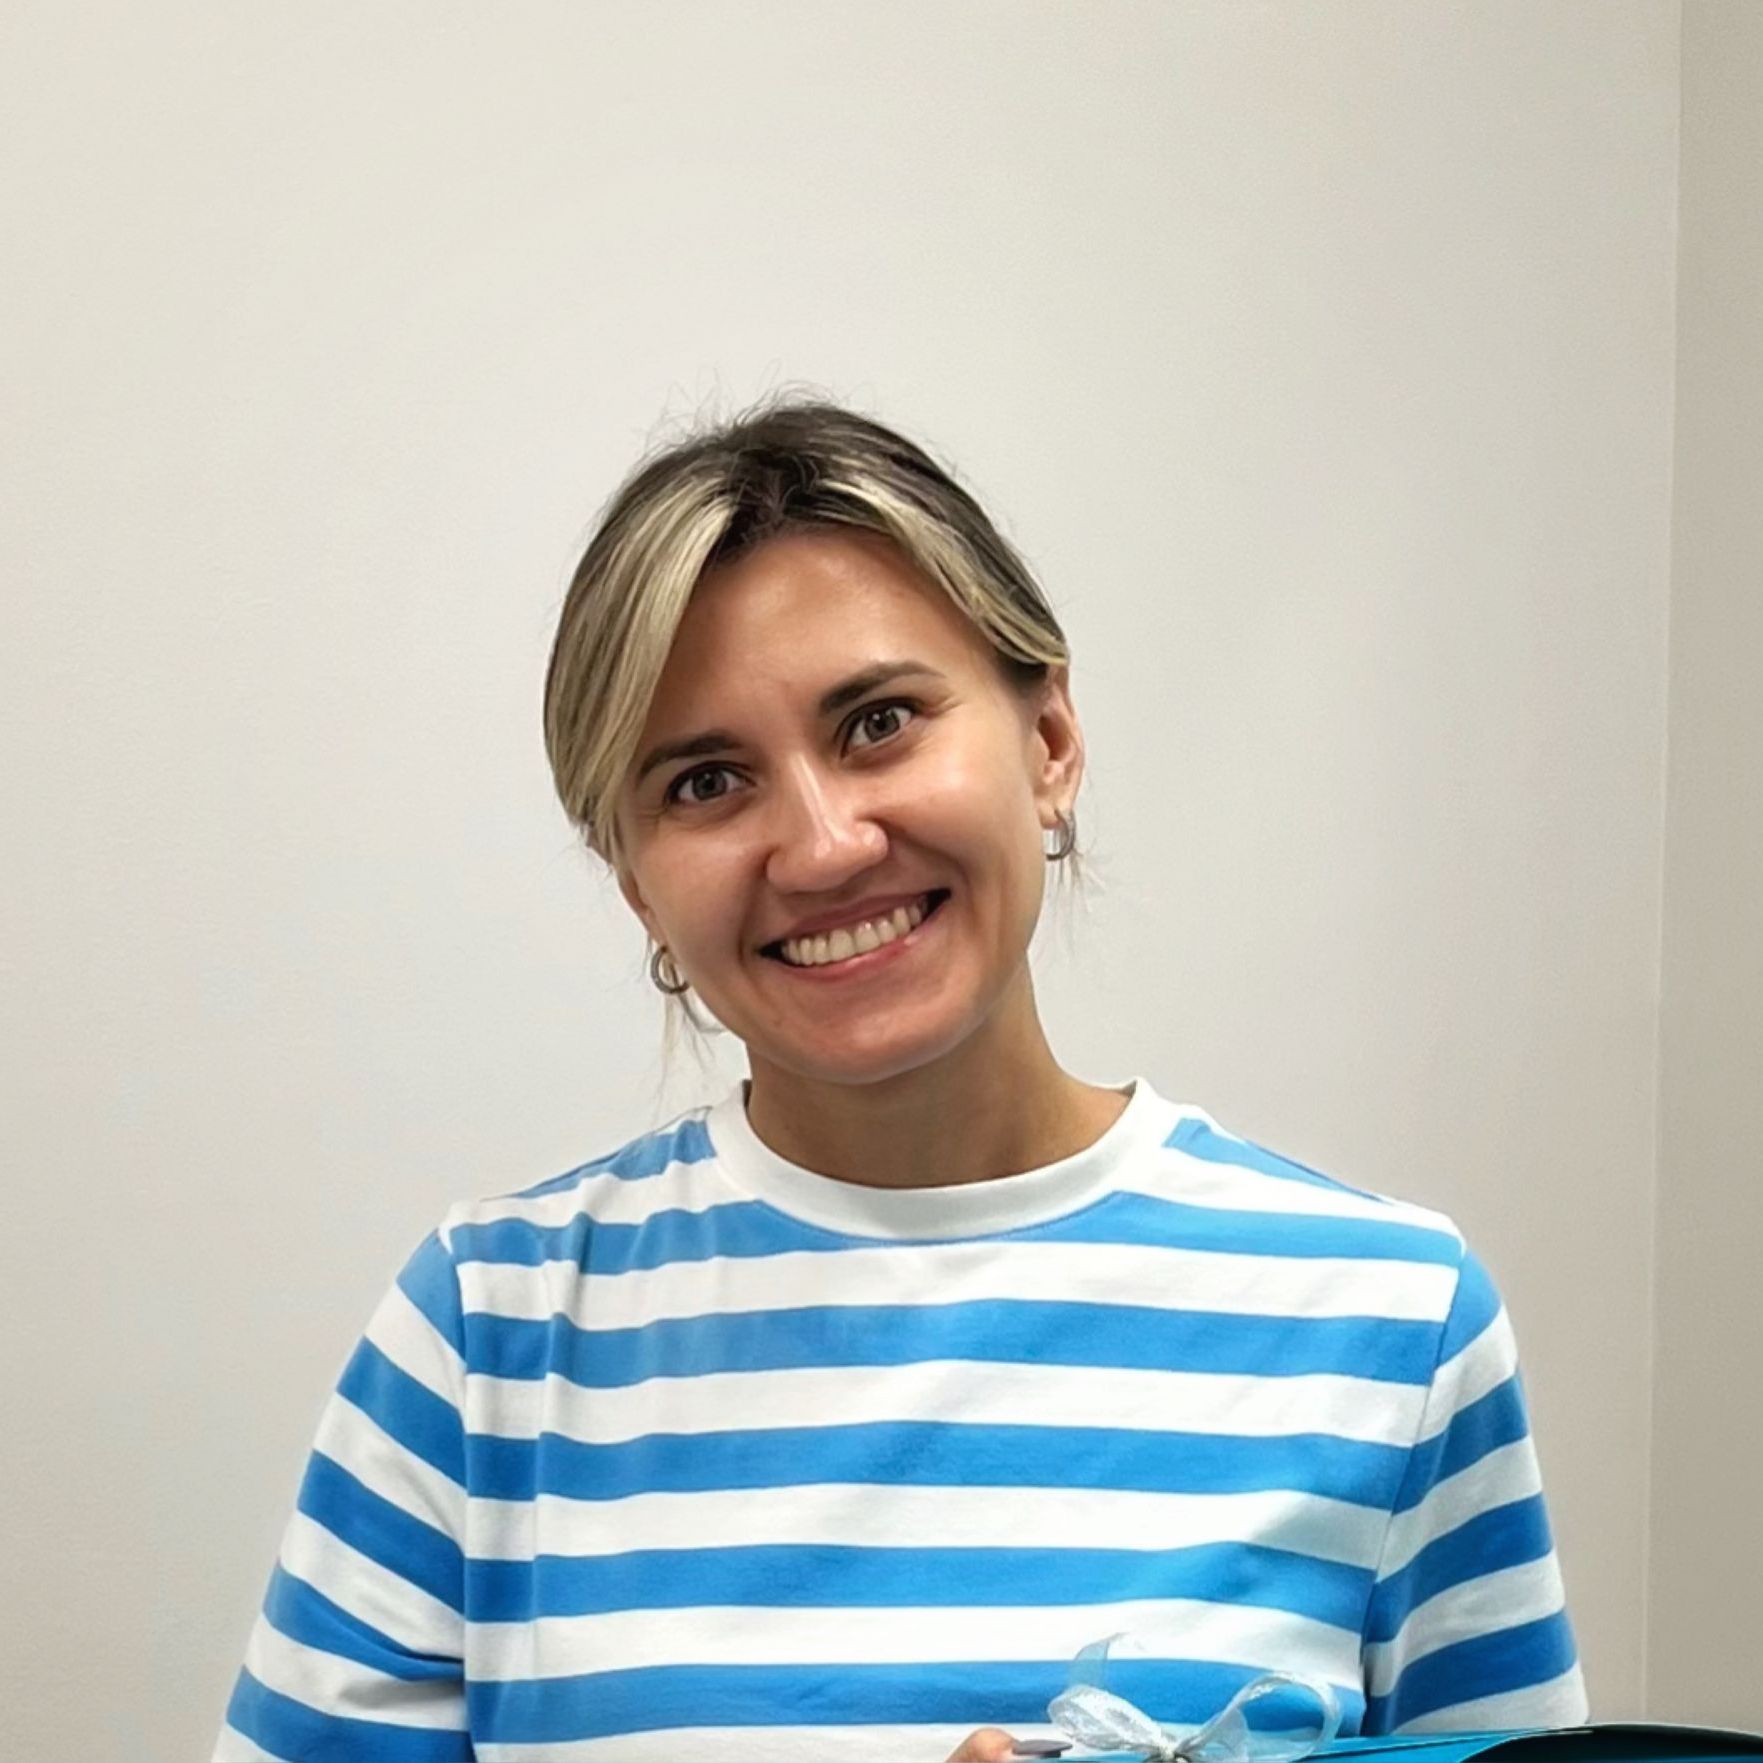 A woman is wearing a blue and white striped shirt and smiling.